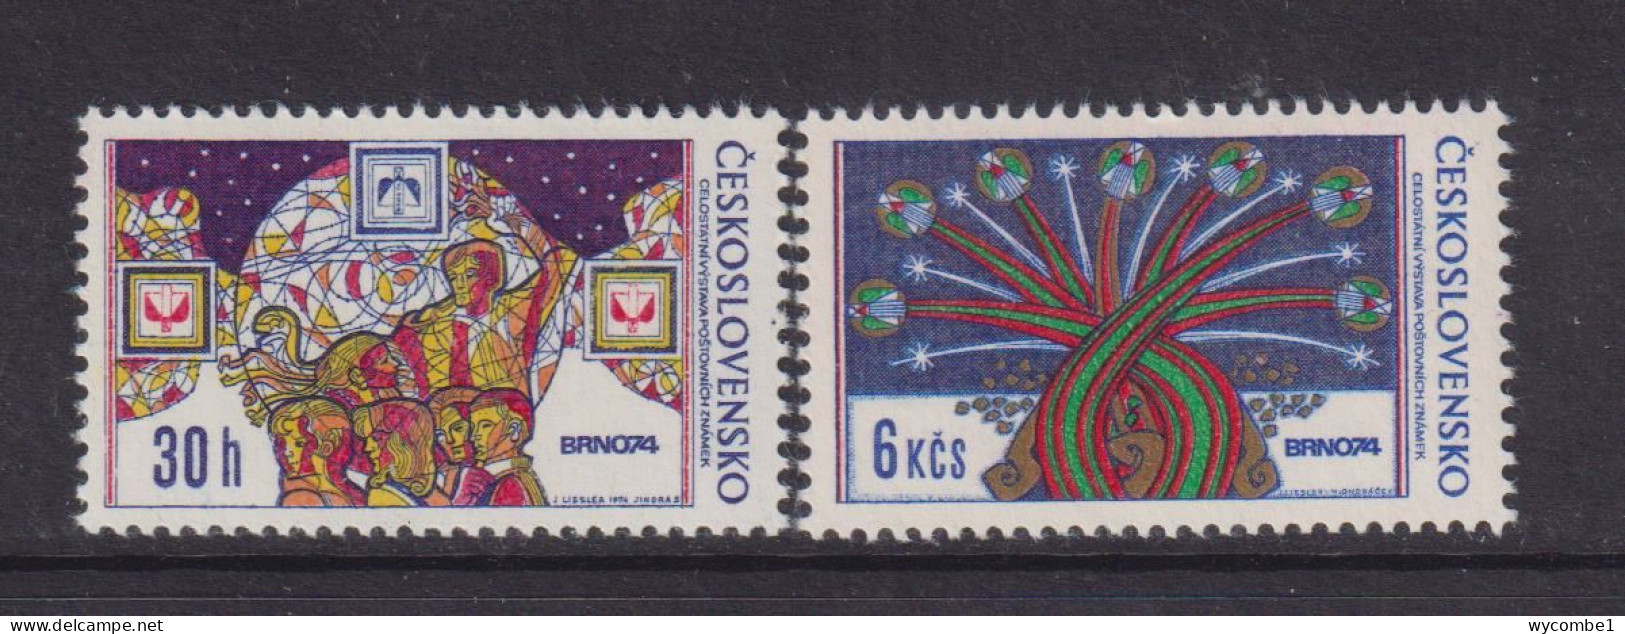 CZECHOSLOVAKIA  - 1974 Brno Stamp Exhibition Set Never Hinged Mint - Unused Stamps